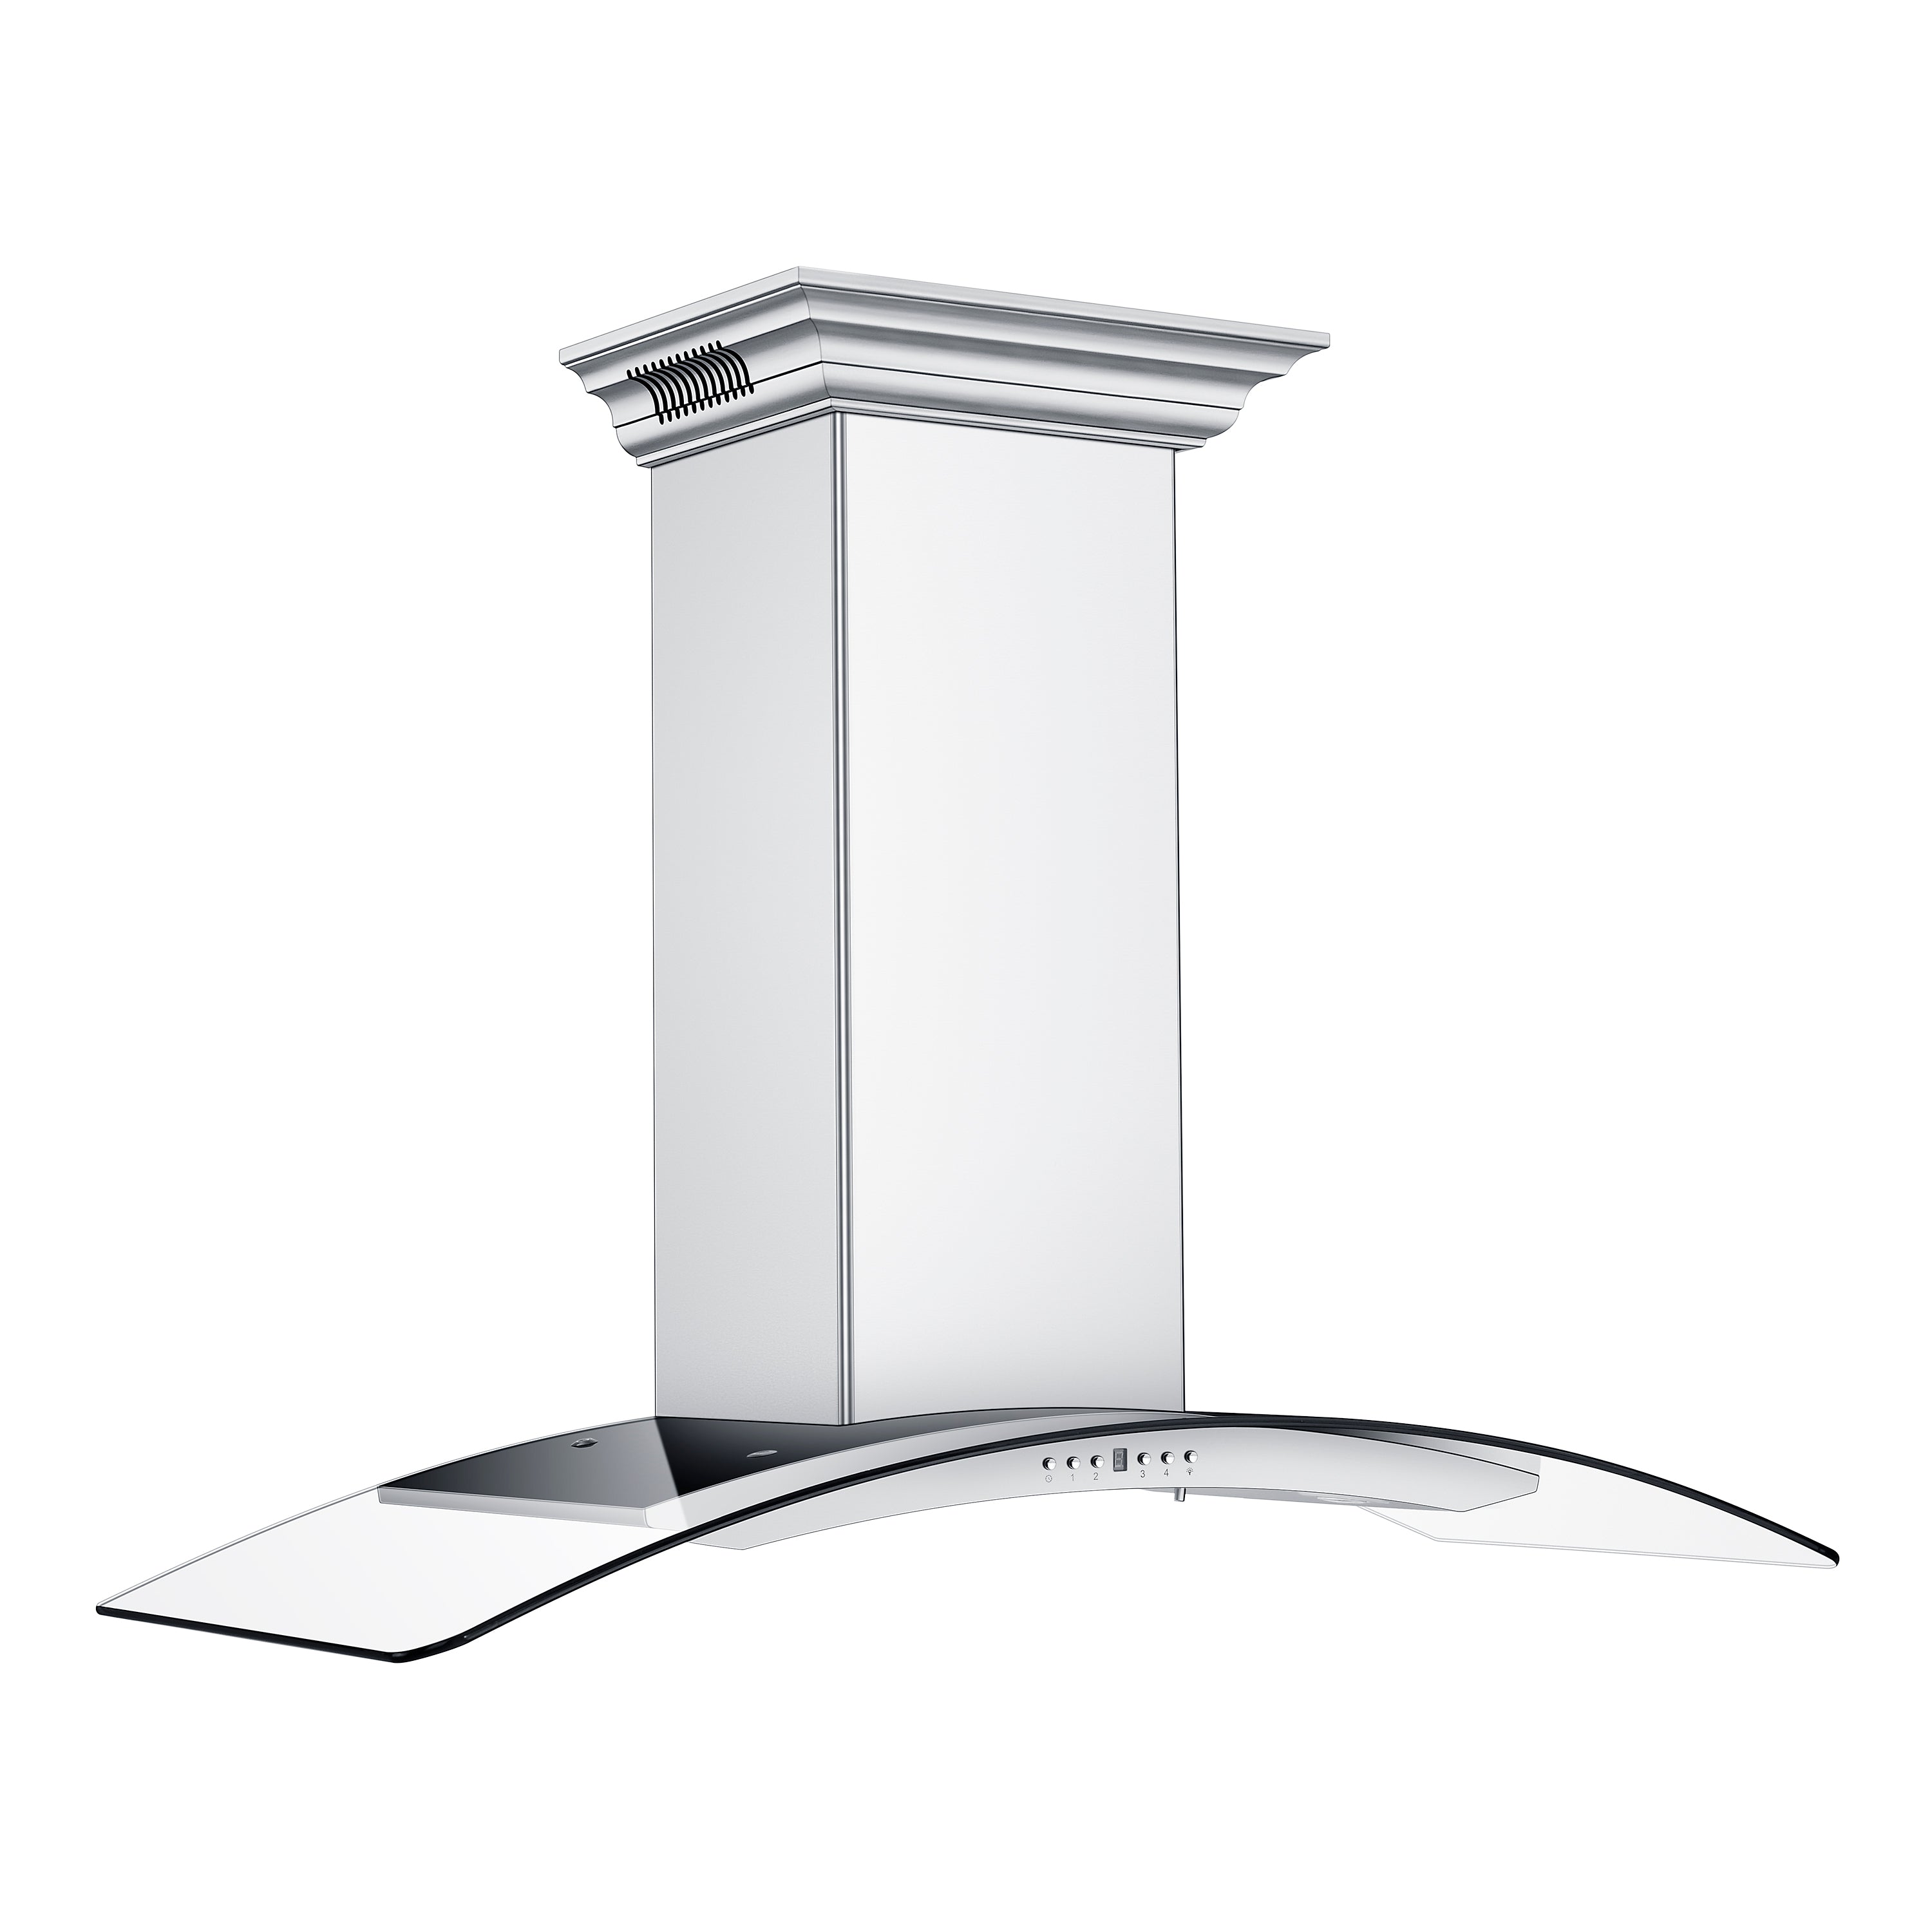 48" ZLINE CrownSound‚ Ducted Vent Wall Mount Range Hood in Stainless Steel with Built-in Bluetooth Speakers (KN4CRN-BT-48)